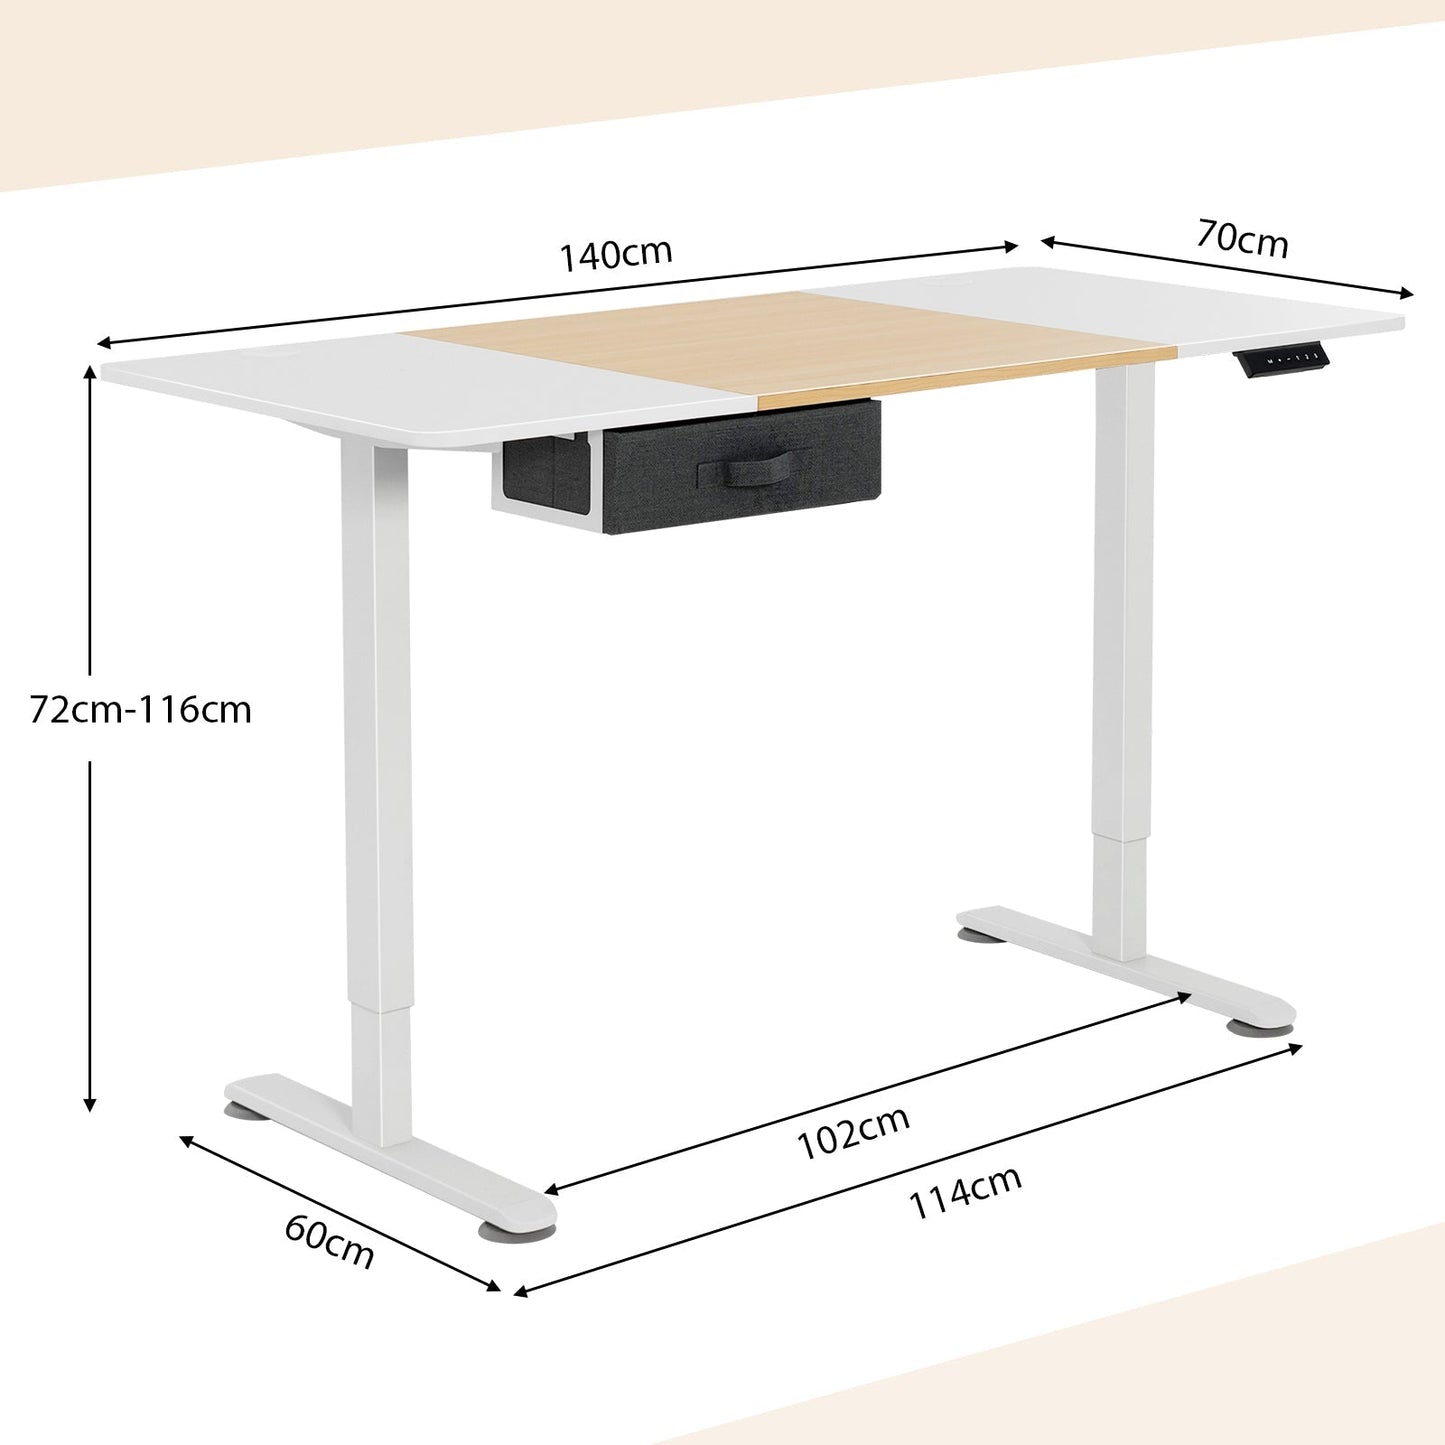 Electric Height Adjustable Standing Desk with USB Charging Port-Natural